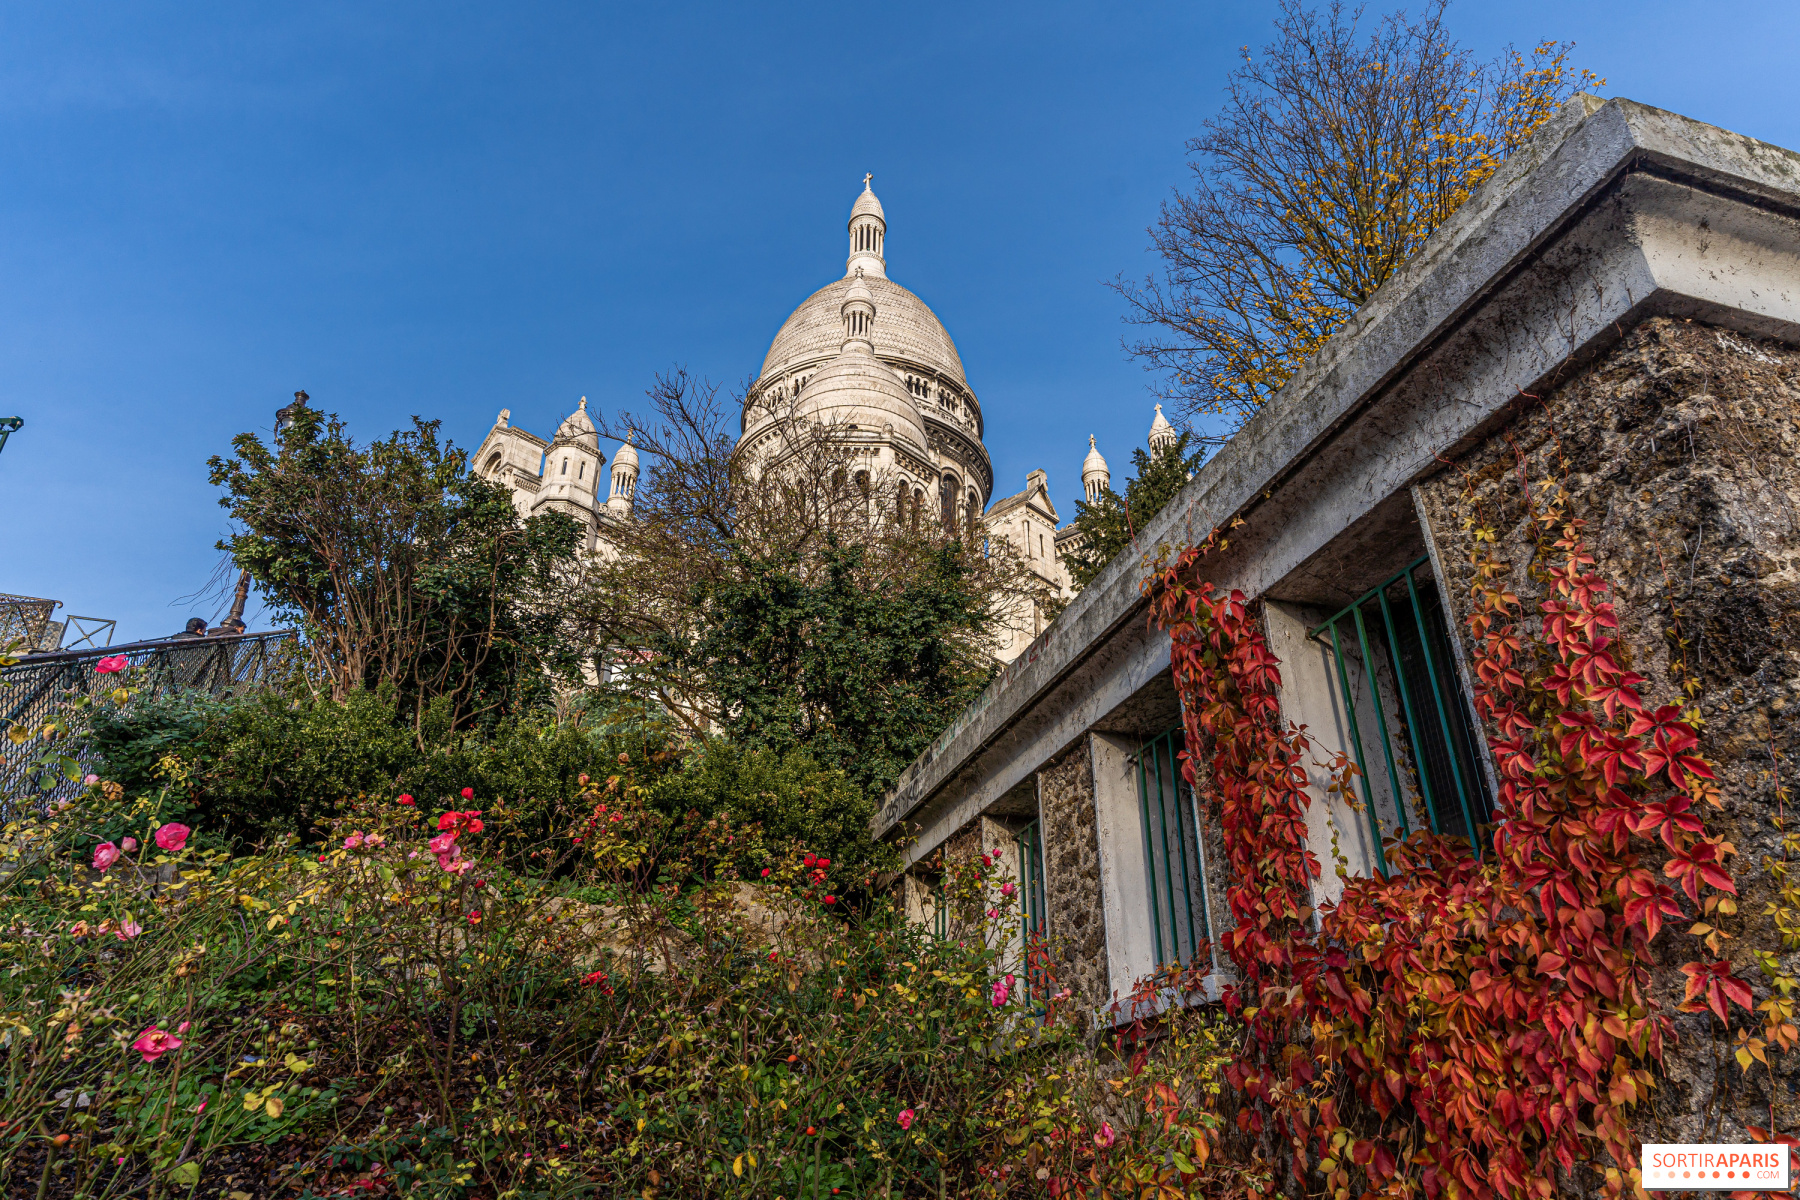 Hotel Le Jardin de Neuilly: Not Far from Fondation Louis Vuitton in Paris -  France Today